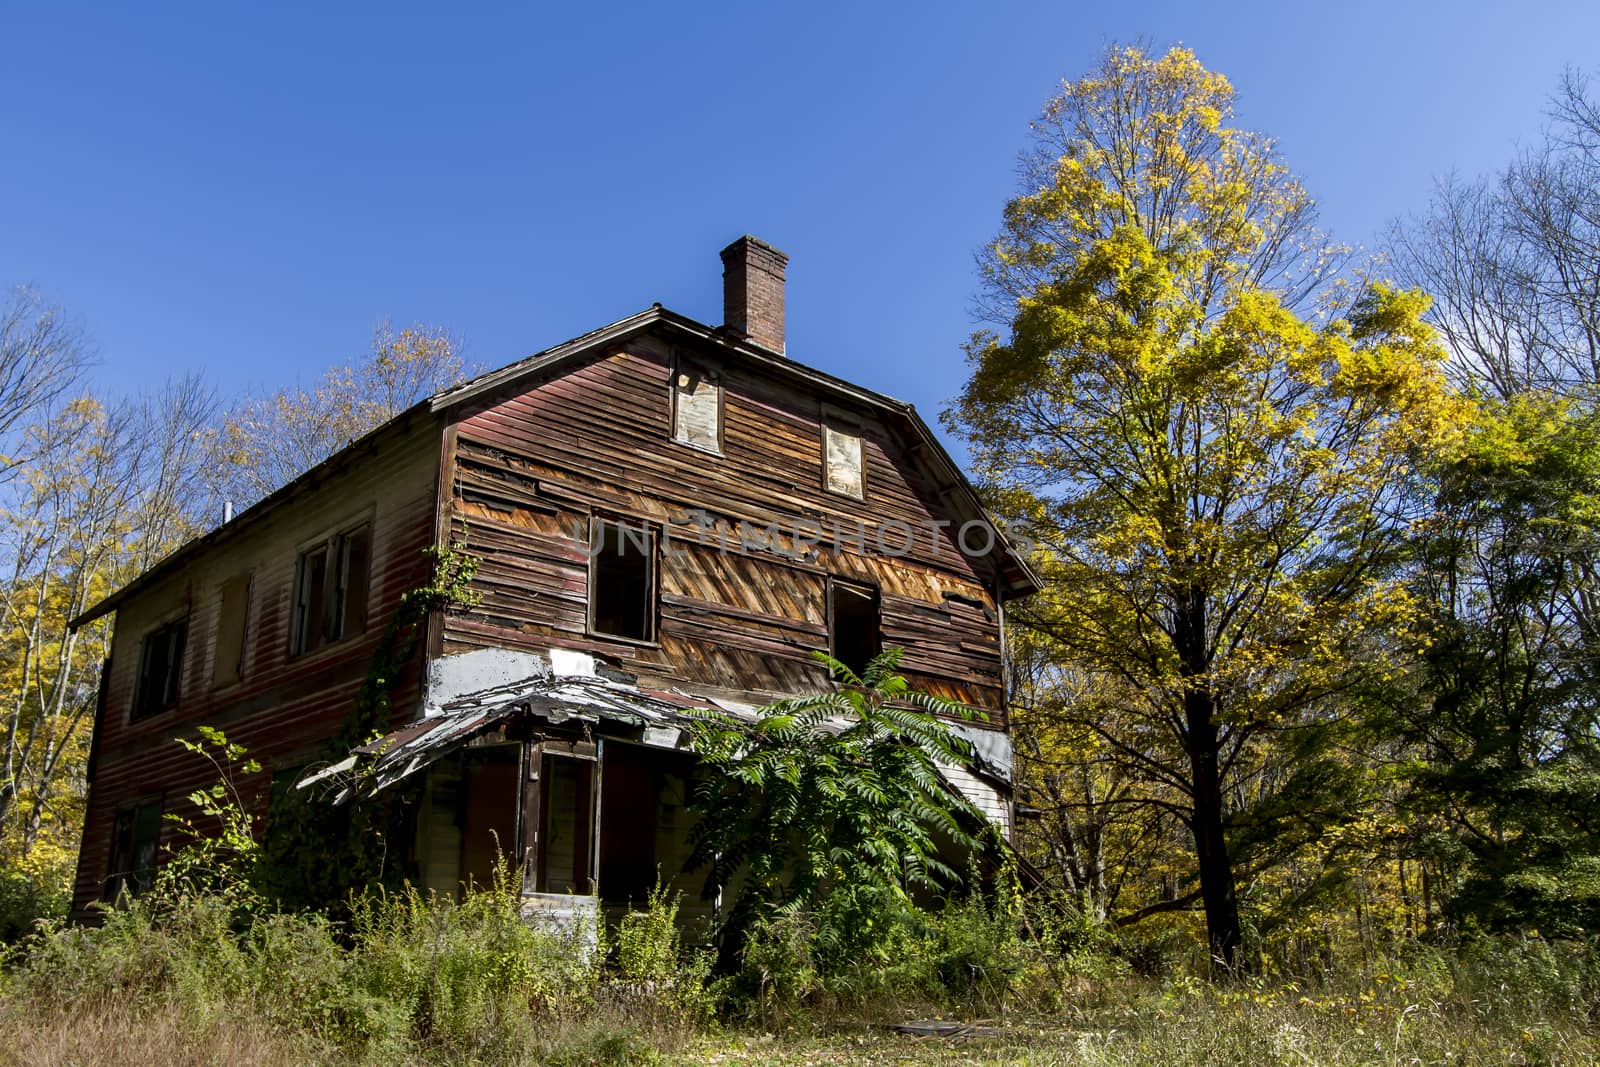 Abandoned house in the woods by tedanddees